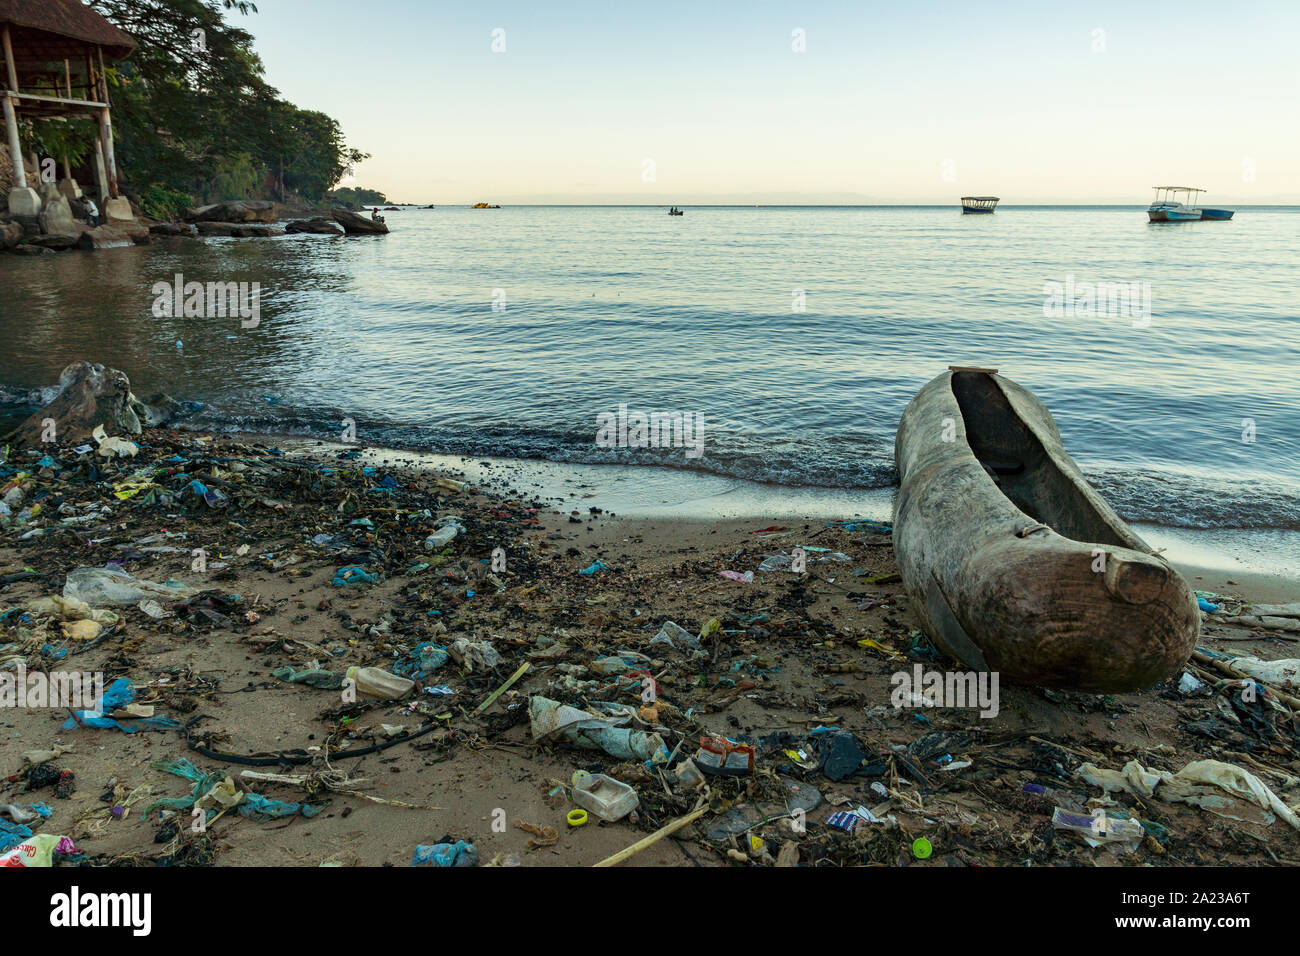 Plastic pollution on the shores of Lake Malawi, near Nkhata Bay, alongside a traditional hand-carved canoe Stock Photo